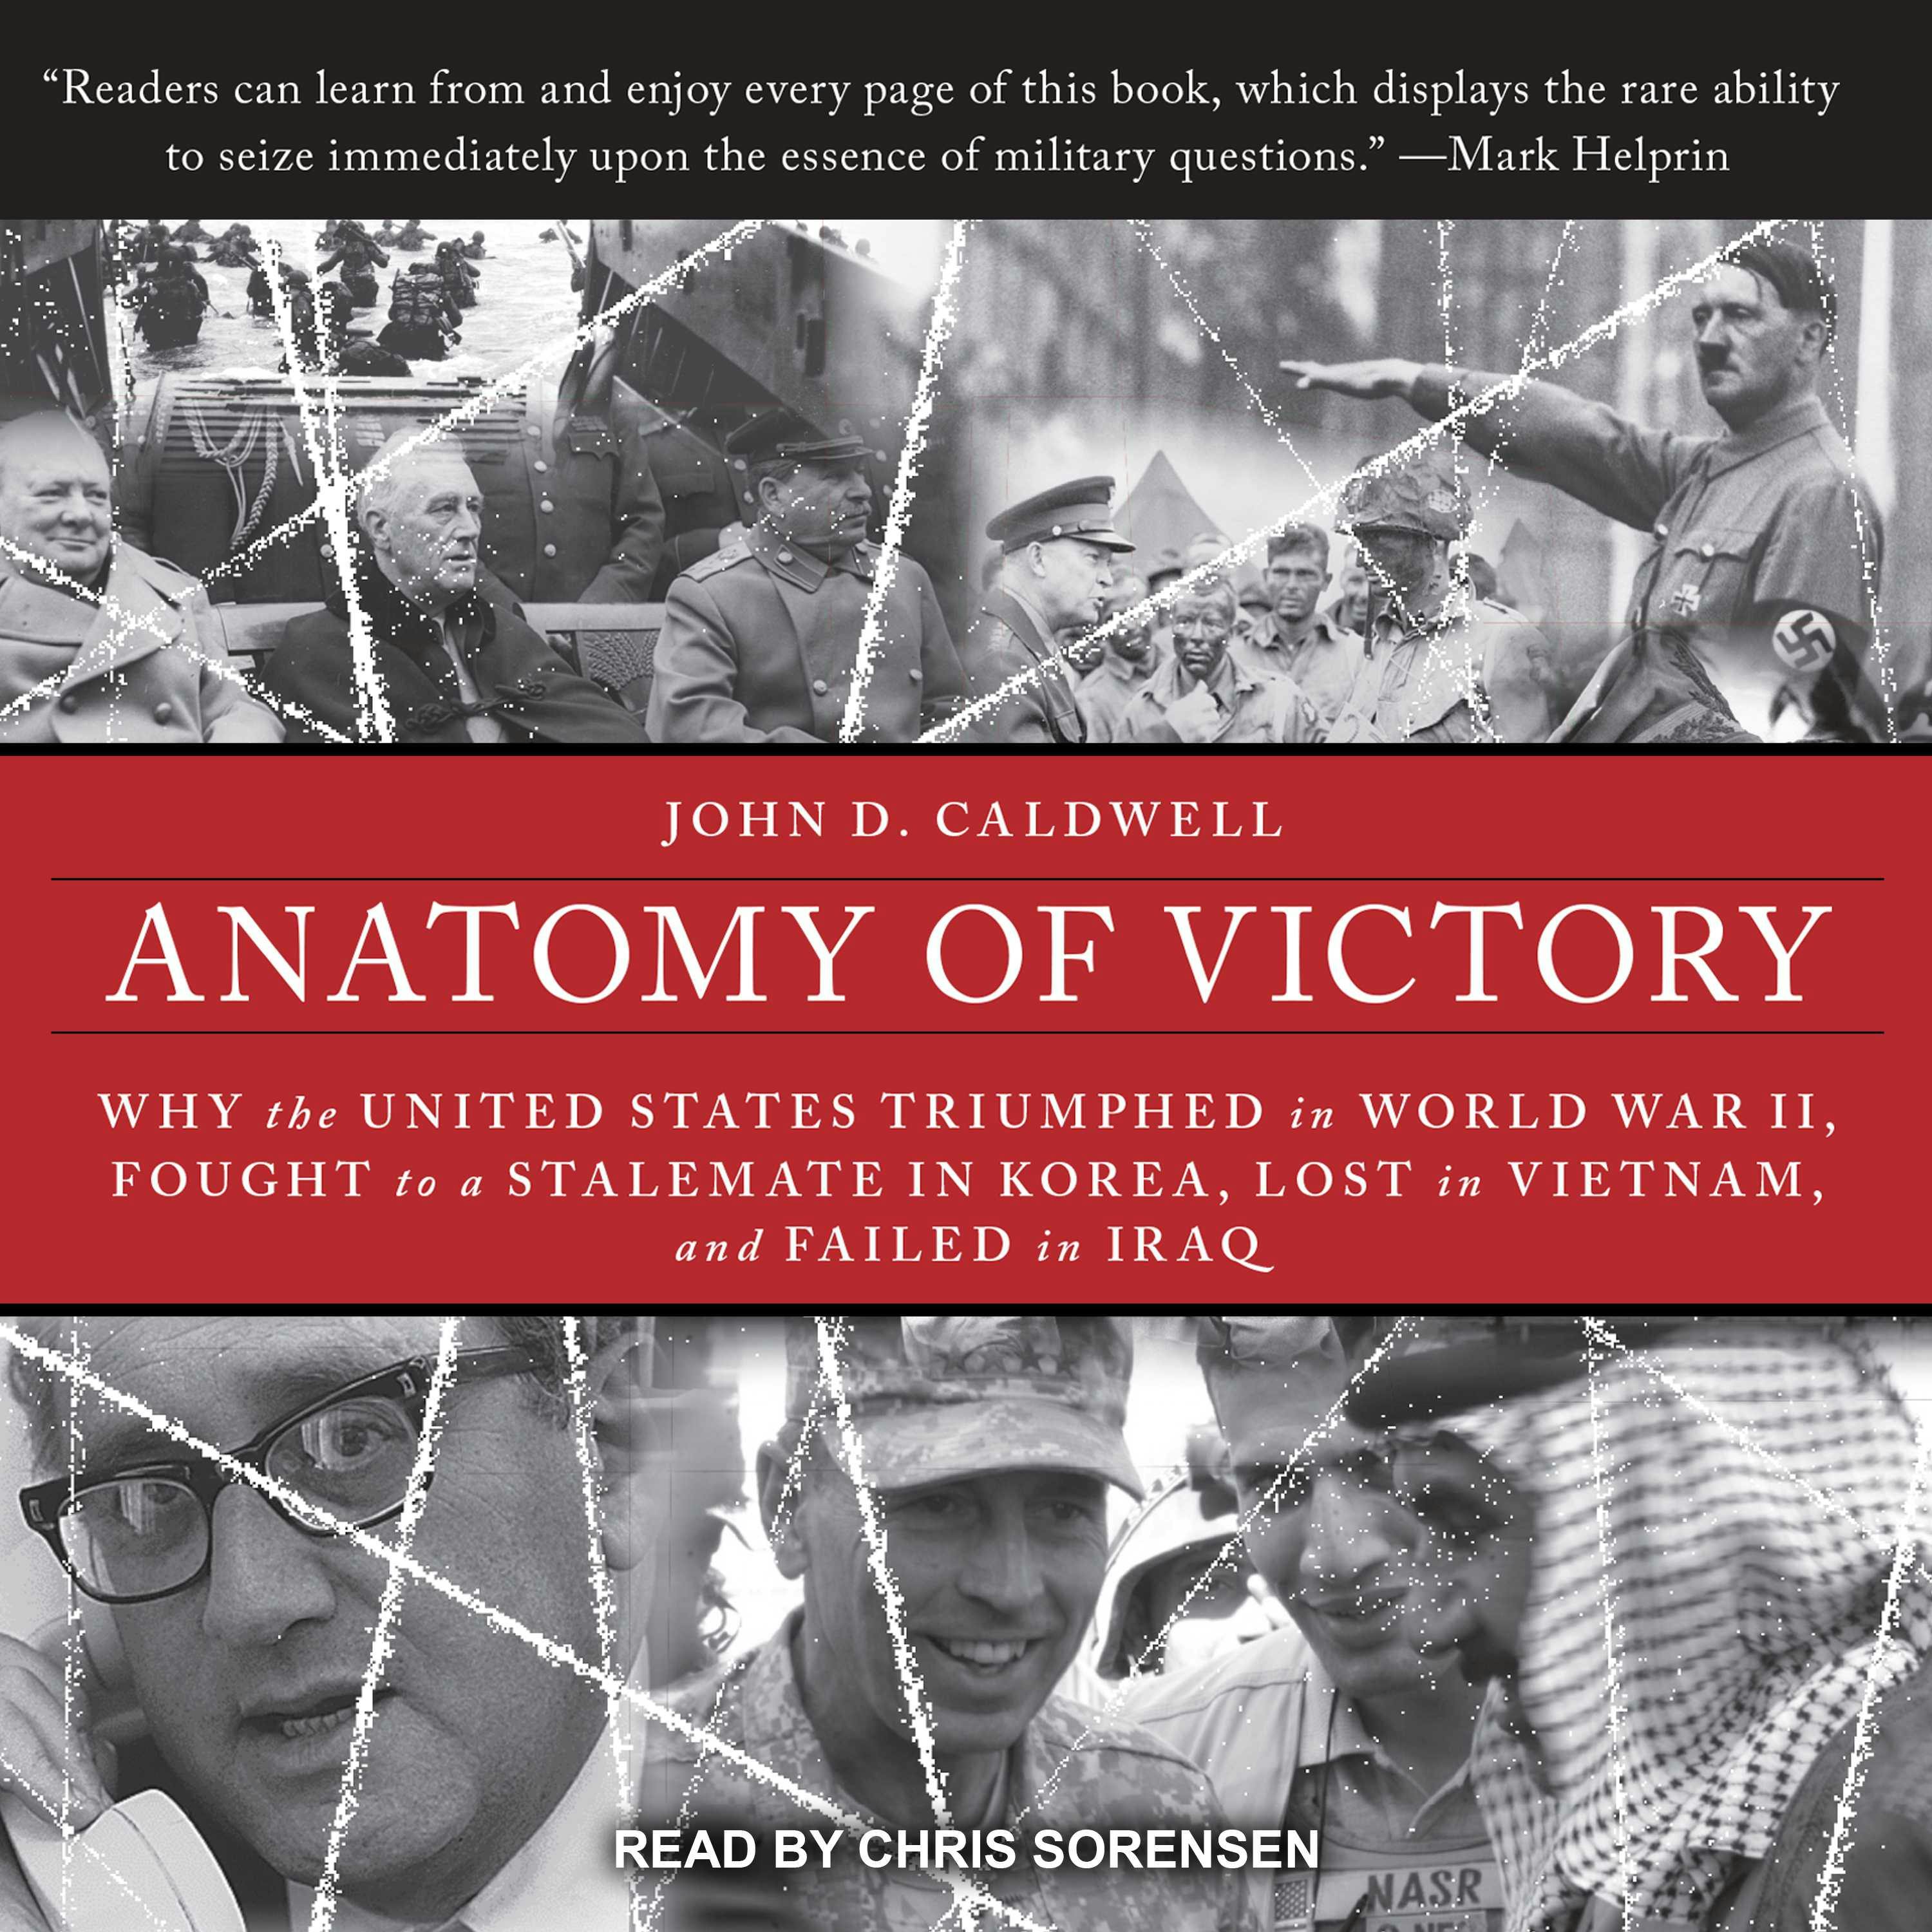 Anatomy of Victory: Why the United States Triumphed in World War II, Fought to a Stalemate in Korea, Lost in Vietnam, and Failed in Iraq - John D. Caldwell